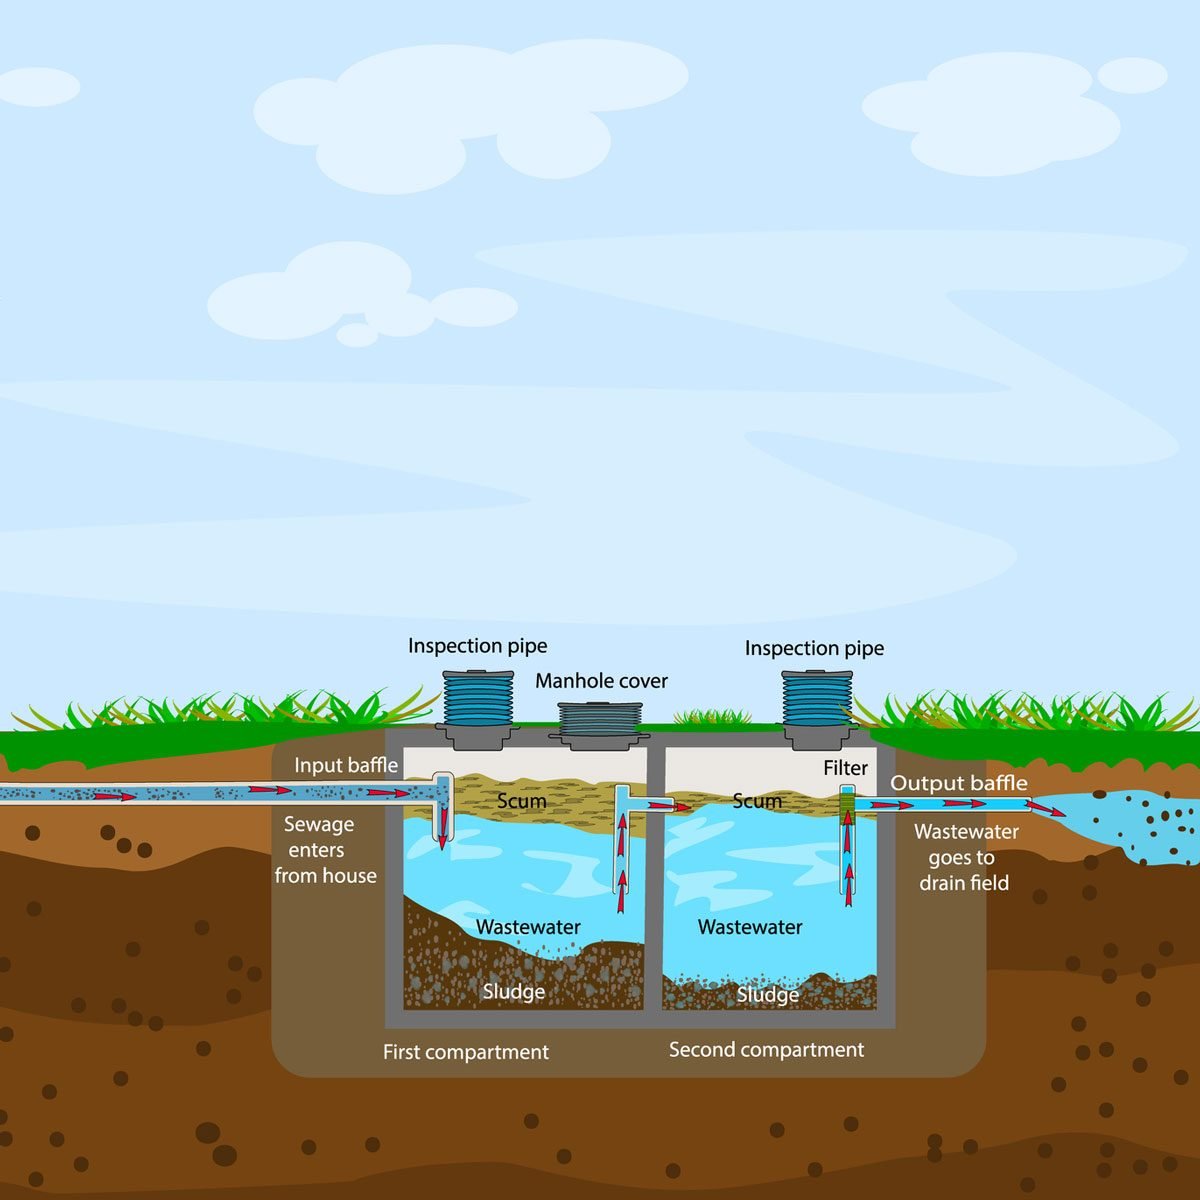 5 Top Myths About Septic Systems